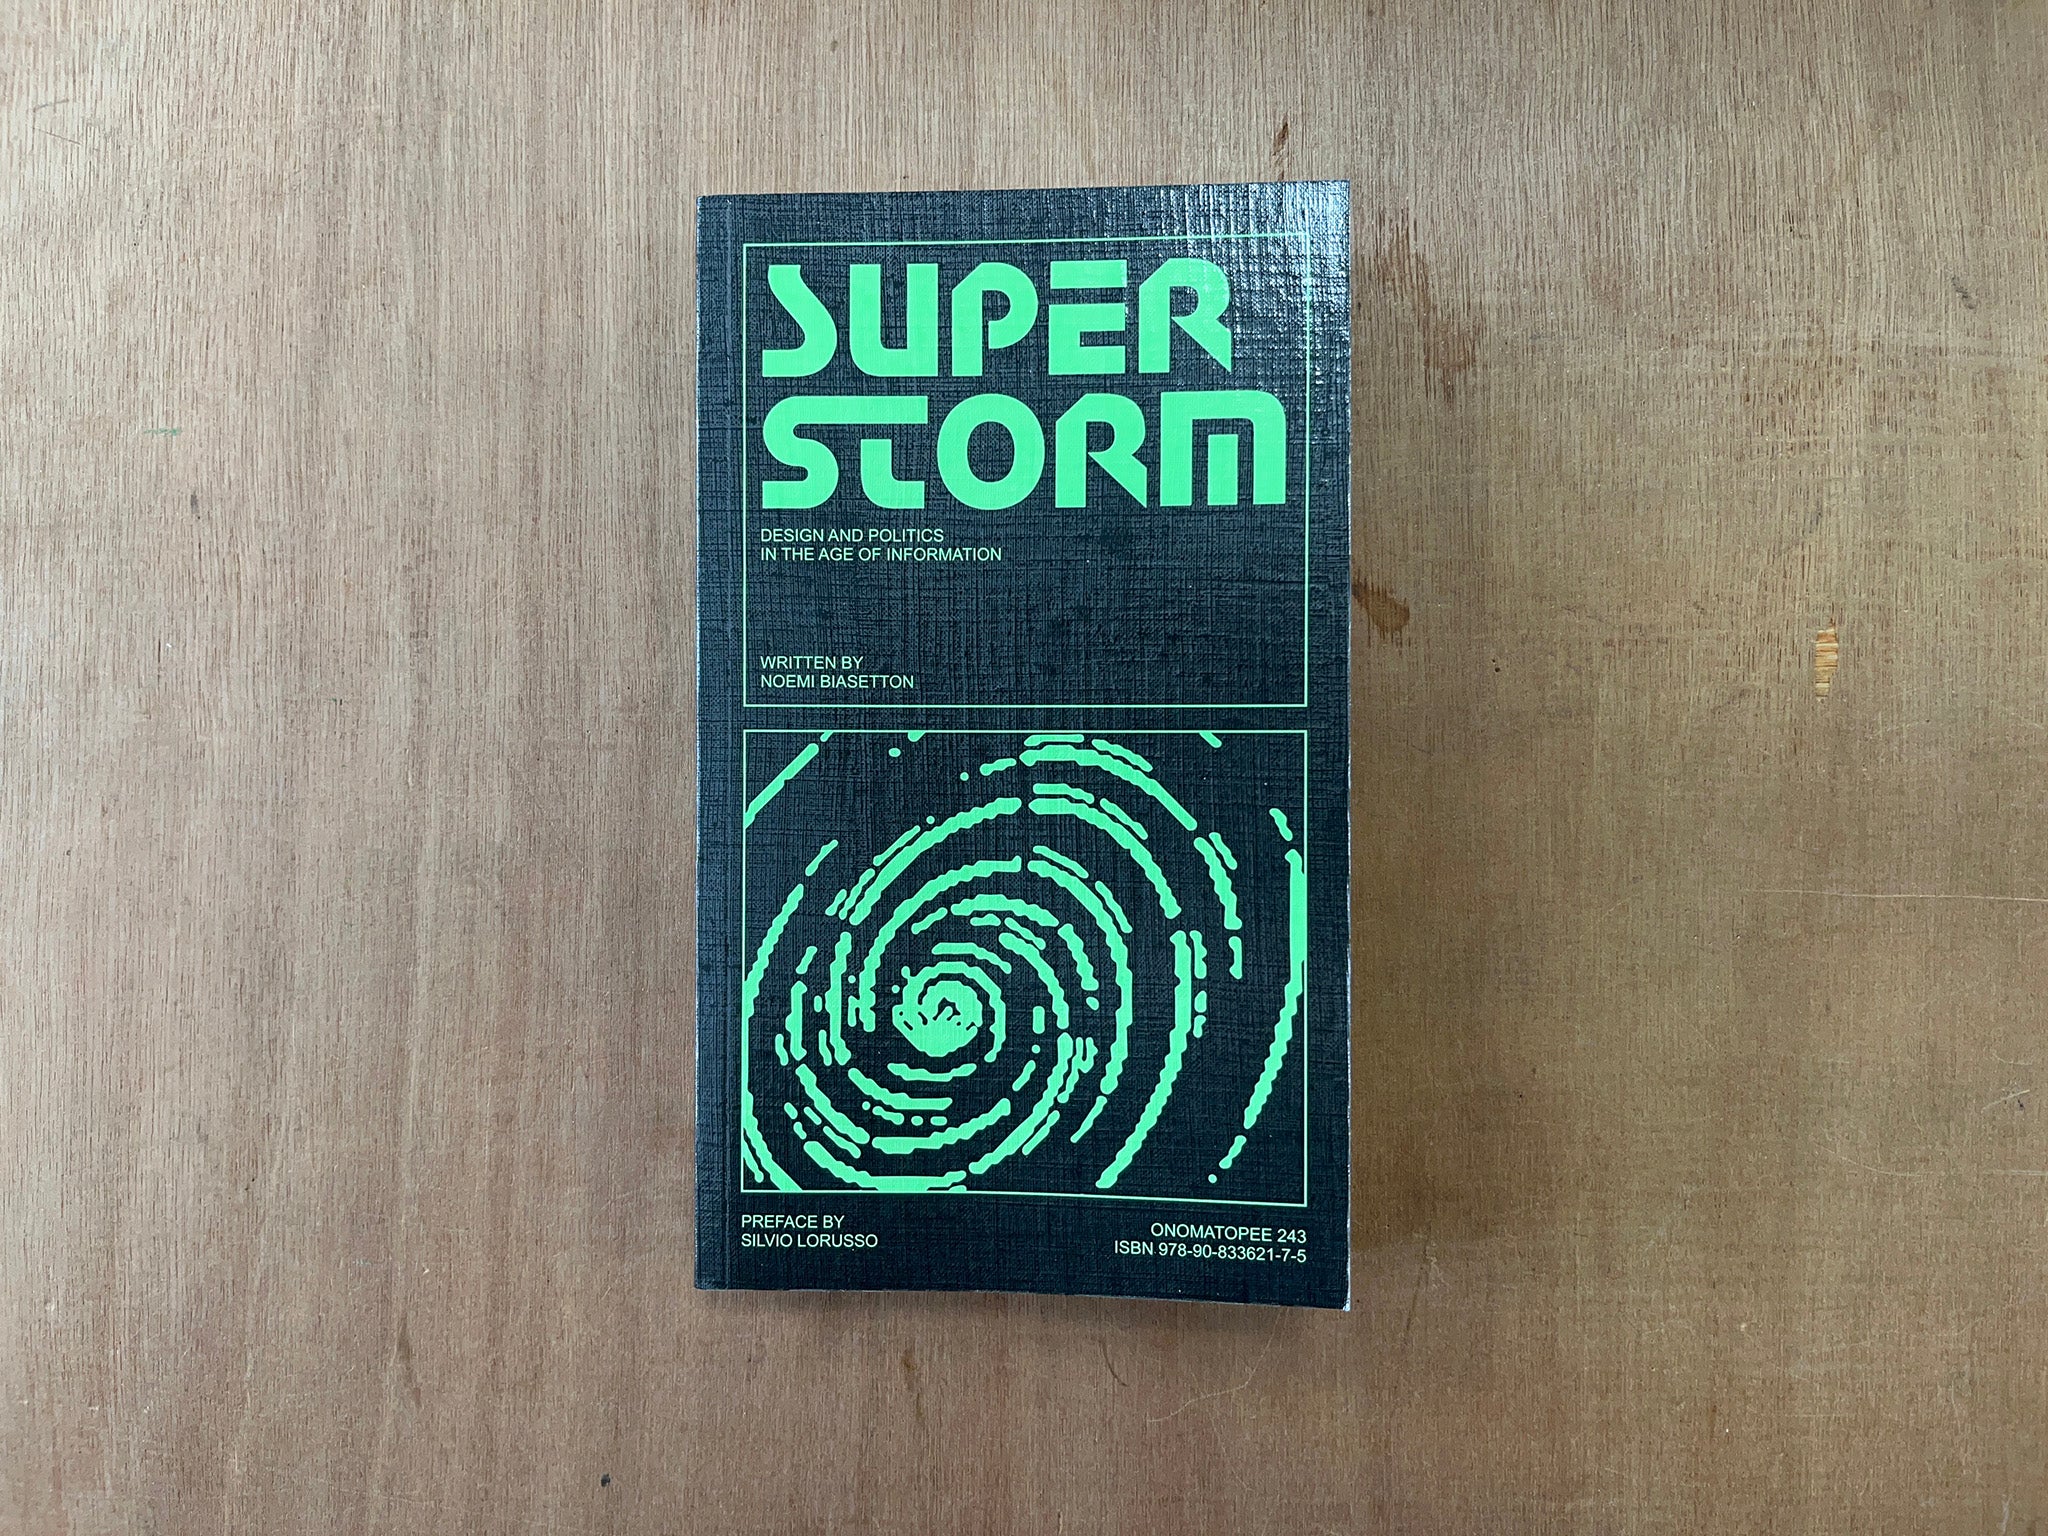 SUPERSTORM: DESIGN AND POLITICS IN THE AGE OF INFORMATION Ed. by Noemi Biasetton